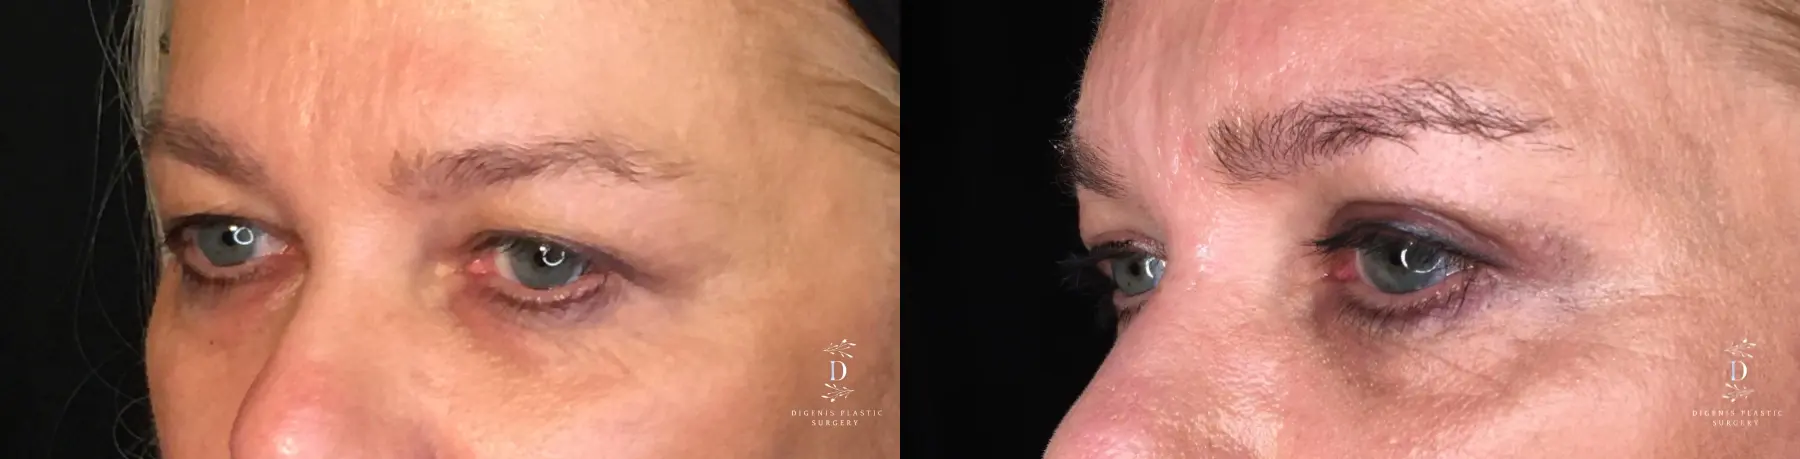 Eyelid Surgery: Patient 21 - Before and After 2